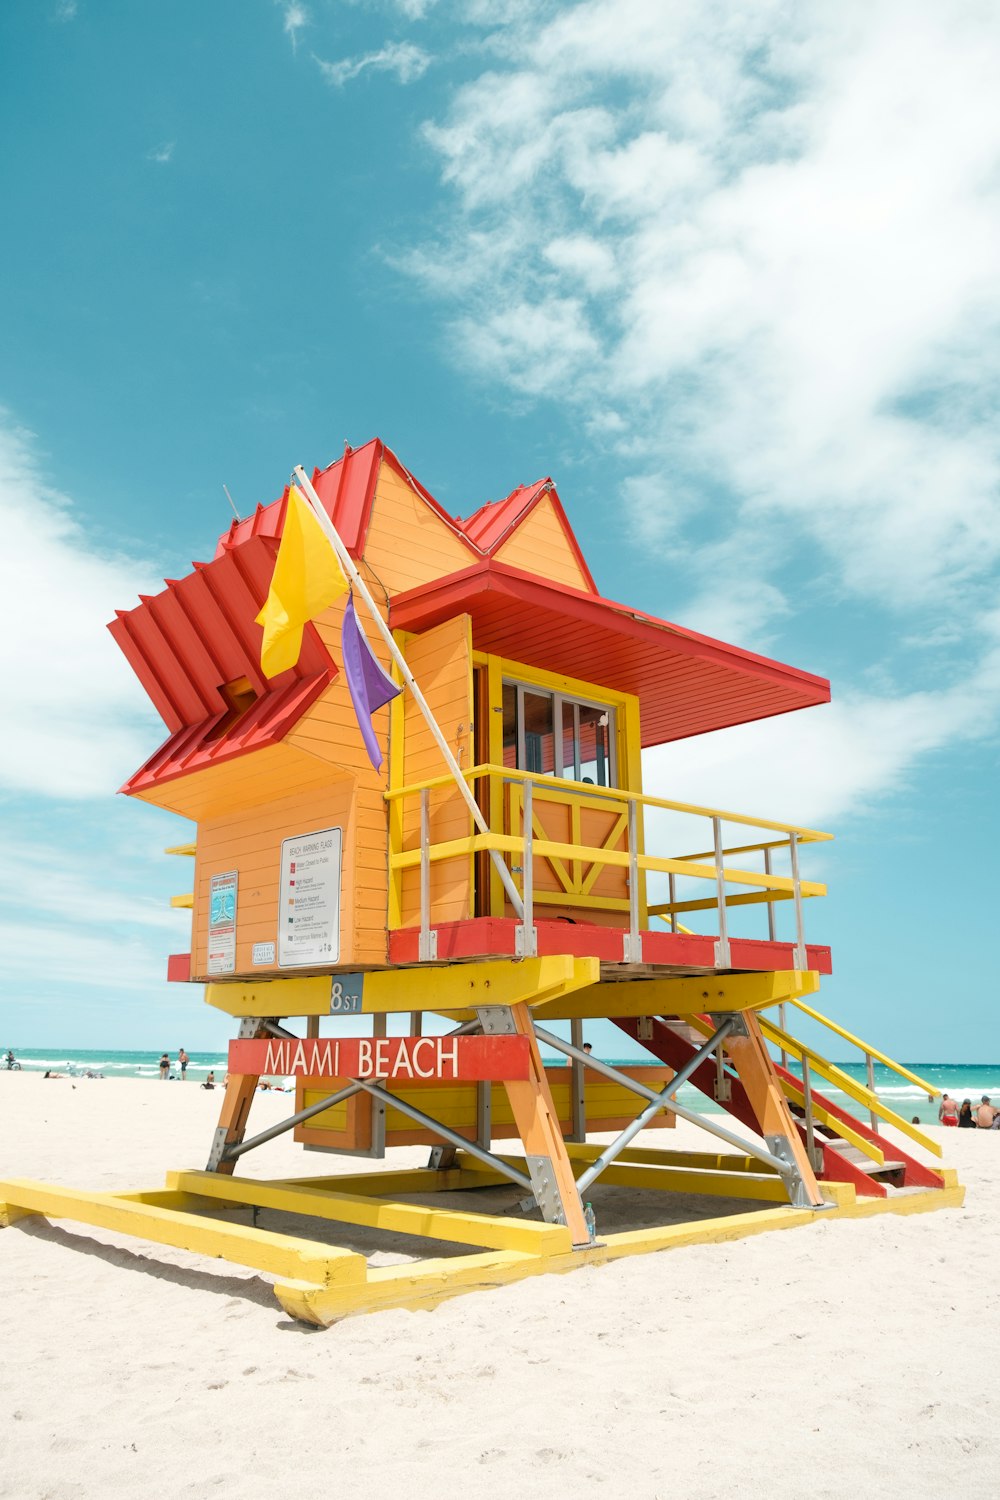 red and white wooden lifeguard house on beach shore during daytime